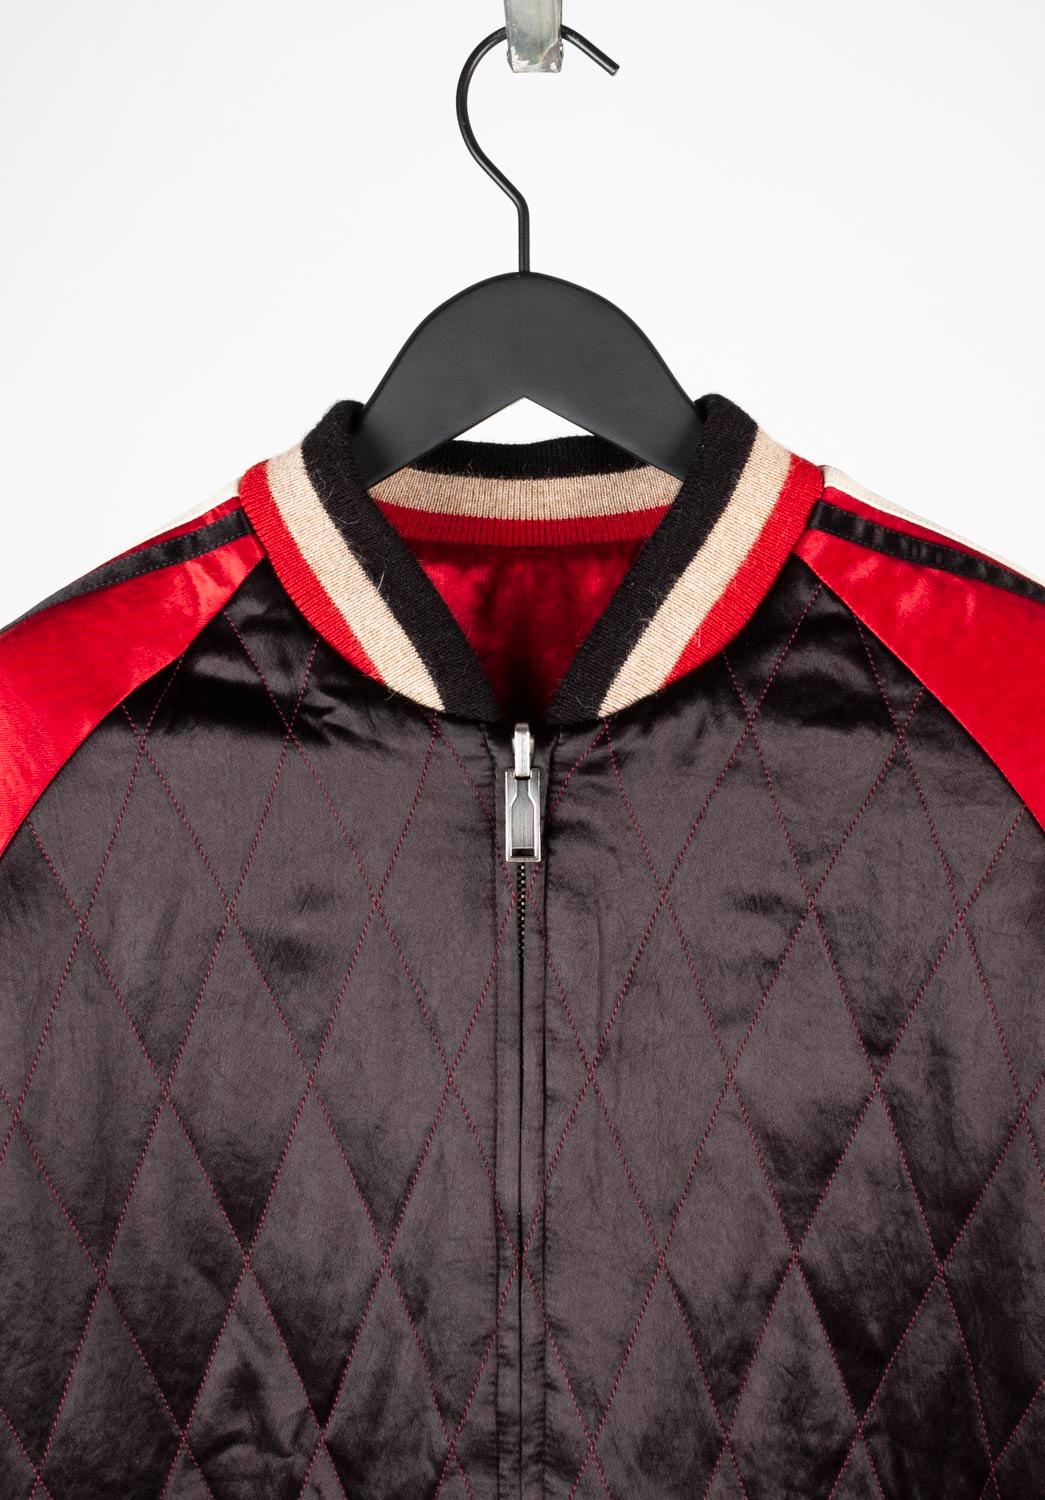 100% genuine Gucci Reversible Bomber Jacket, S668 
Color: multi
(An actual color may a bit vary due to individual computer screen interpretation)
Material: 100% polyamide
Tag size: ITA50, M/L
This jacket is great quality item. Rate 9 of 10,